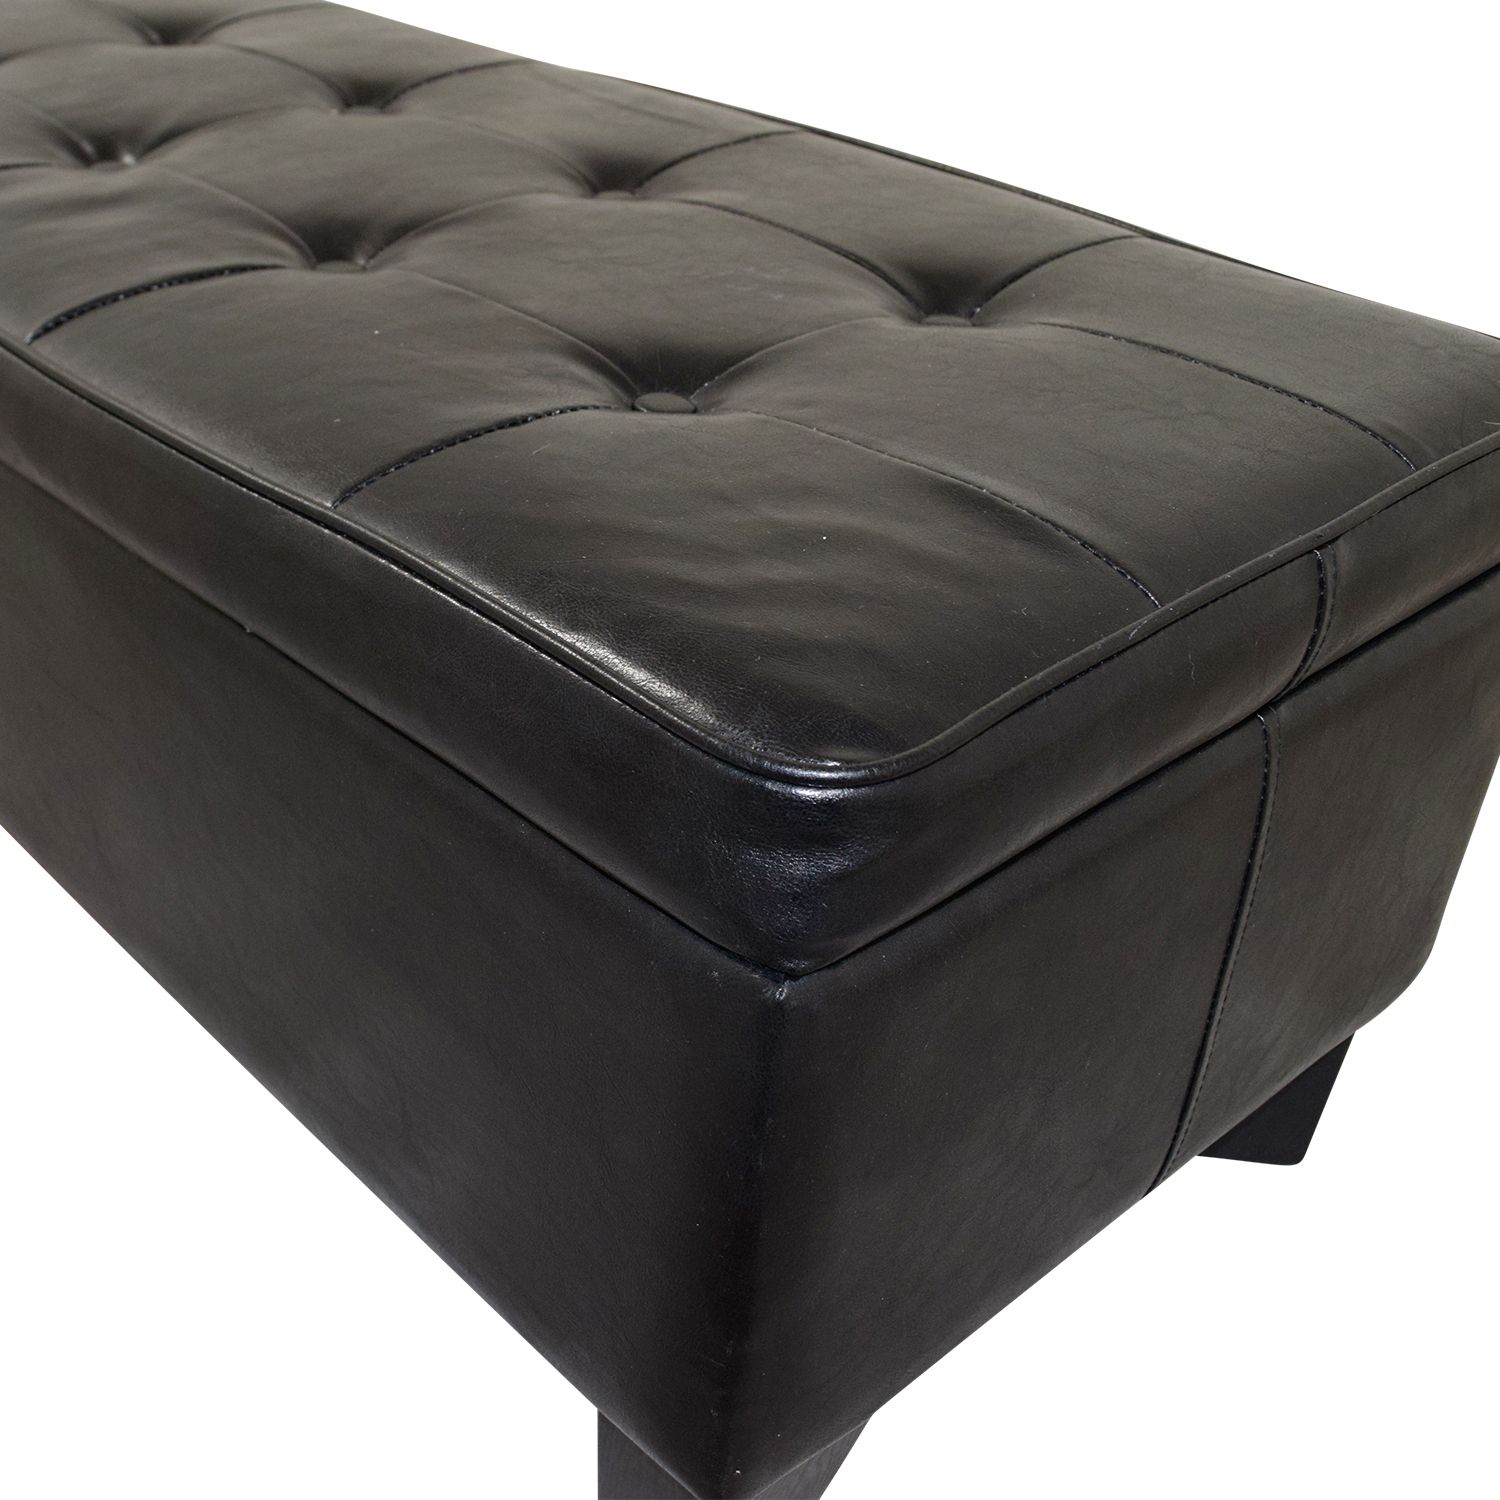 [%42% Off – Black Tufted Faux Leather Ottoman With Storage / Storage For Most Popular Black And Natural Cotton Pouf Ottomans|black And Natural Cotton Pouf Ottomans With Regard To Well Liked 42% Off – Black Tufted Faux Leather Ottoman With Storage / Storage|famous Black And Natural Cotton Pouf Ottomans Within 42% Off – Black Tufted Faux Leather Ottoman With Storage / Storage|most Recent 42% Off – Black Tufted Faux Leather Ottoman With Storage / Storage For Black And Natural Cotton Pouf Ottomans%] (View 9 of 10)